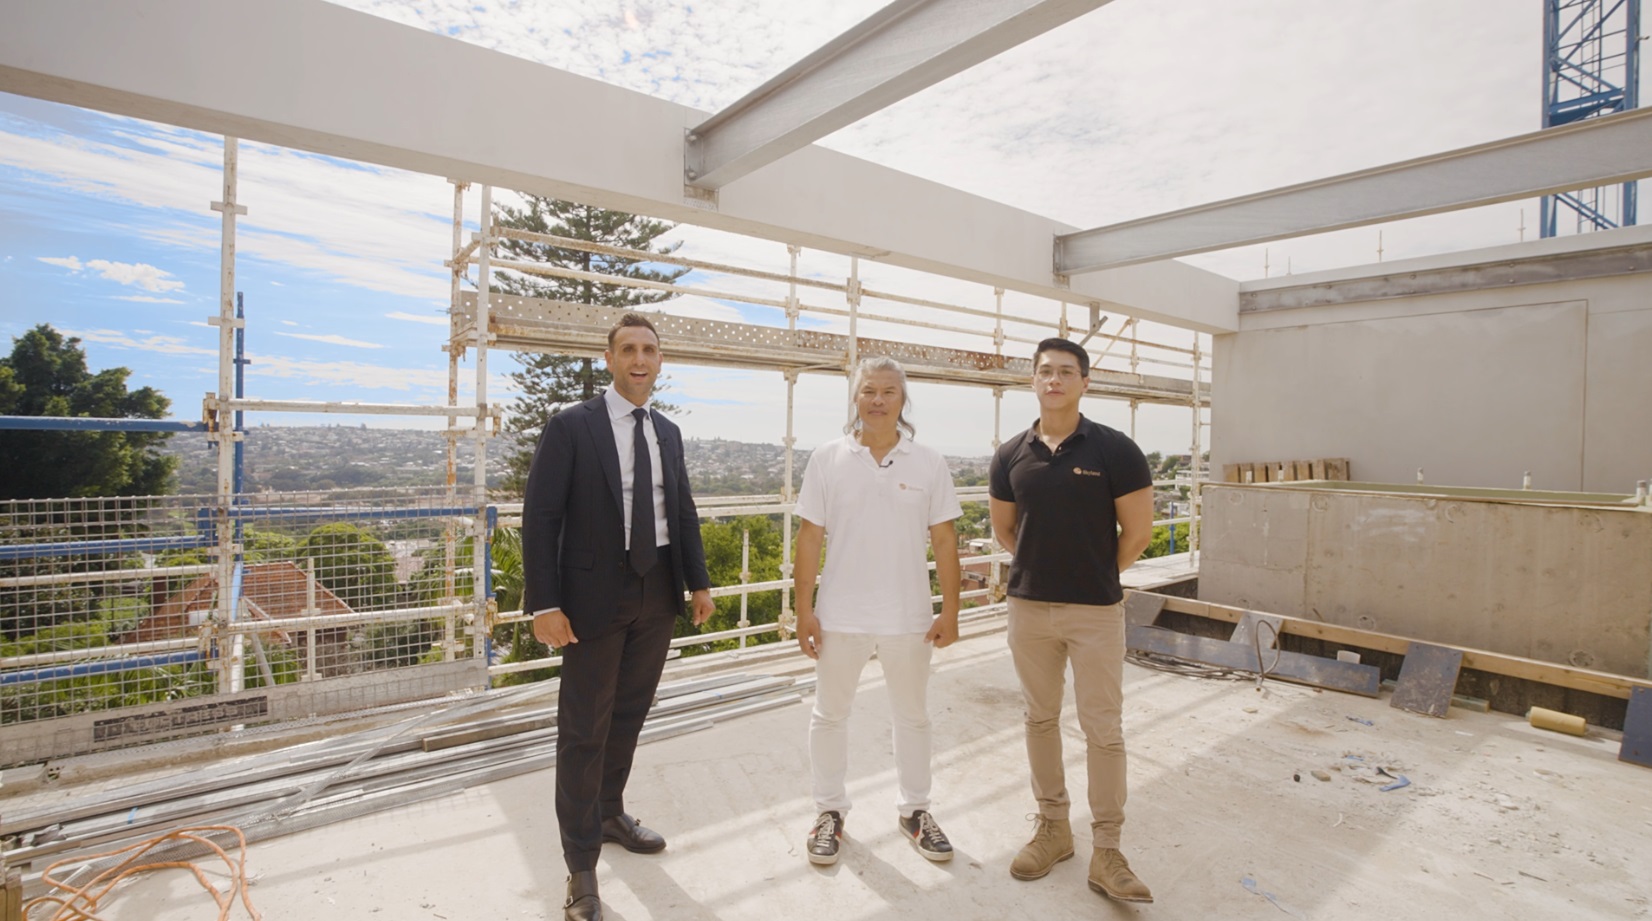 Skyland Group's luxury apartments at Bellevue Hill Nears Completion